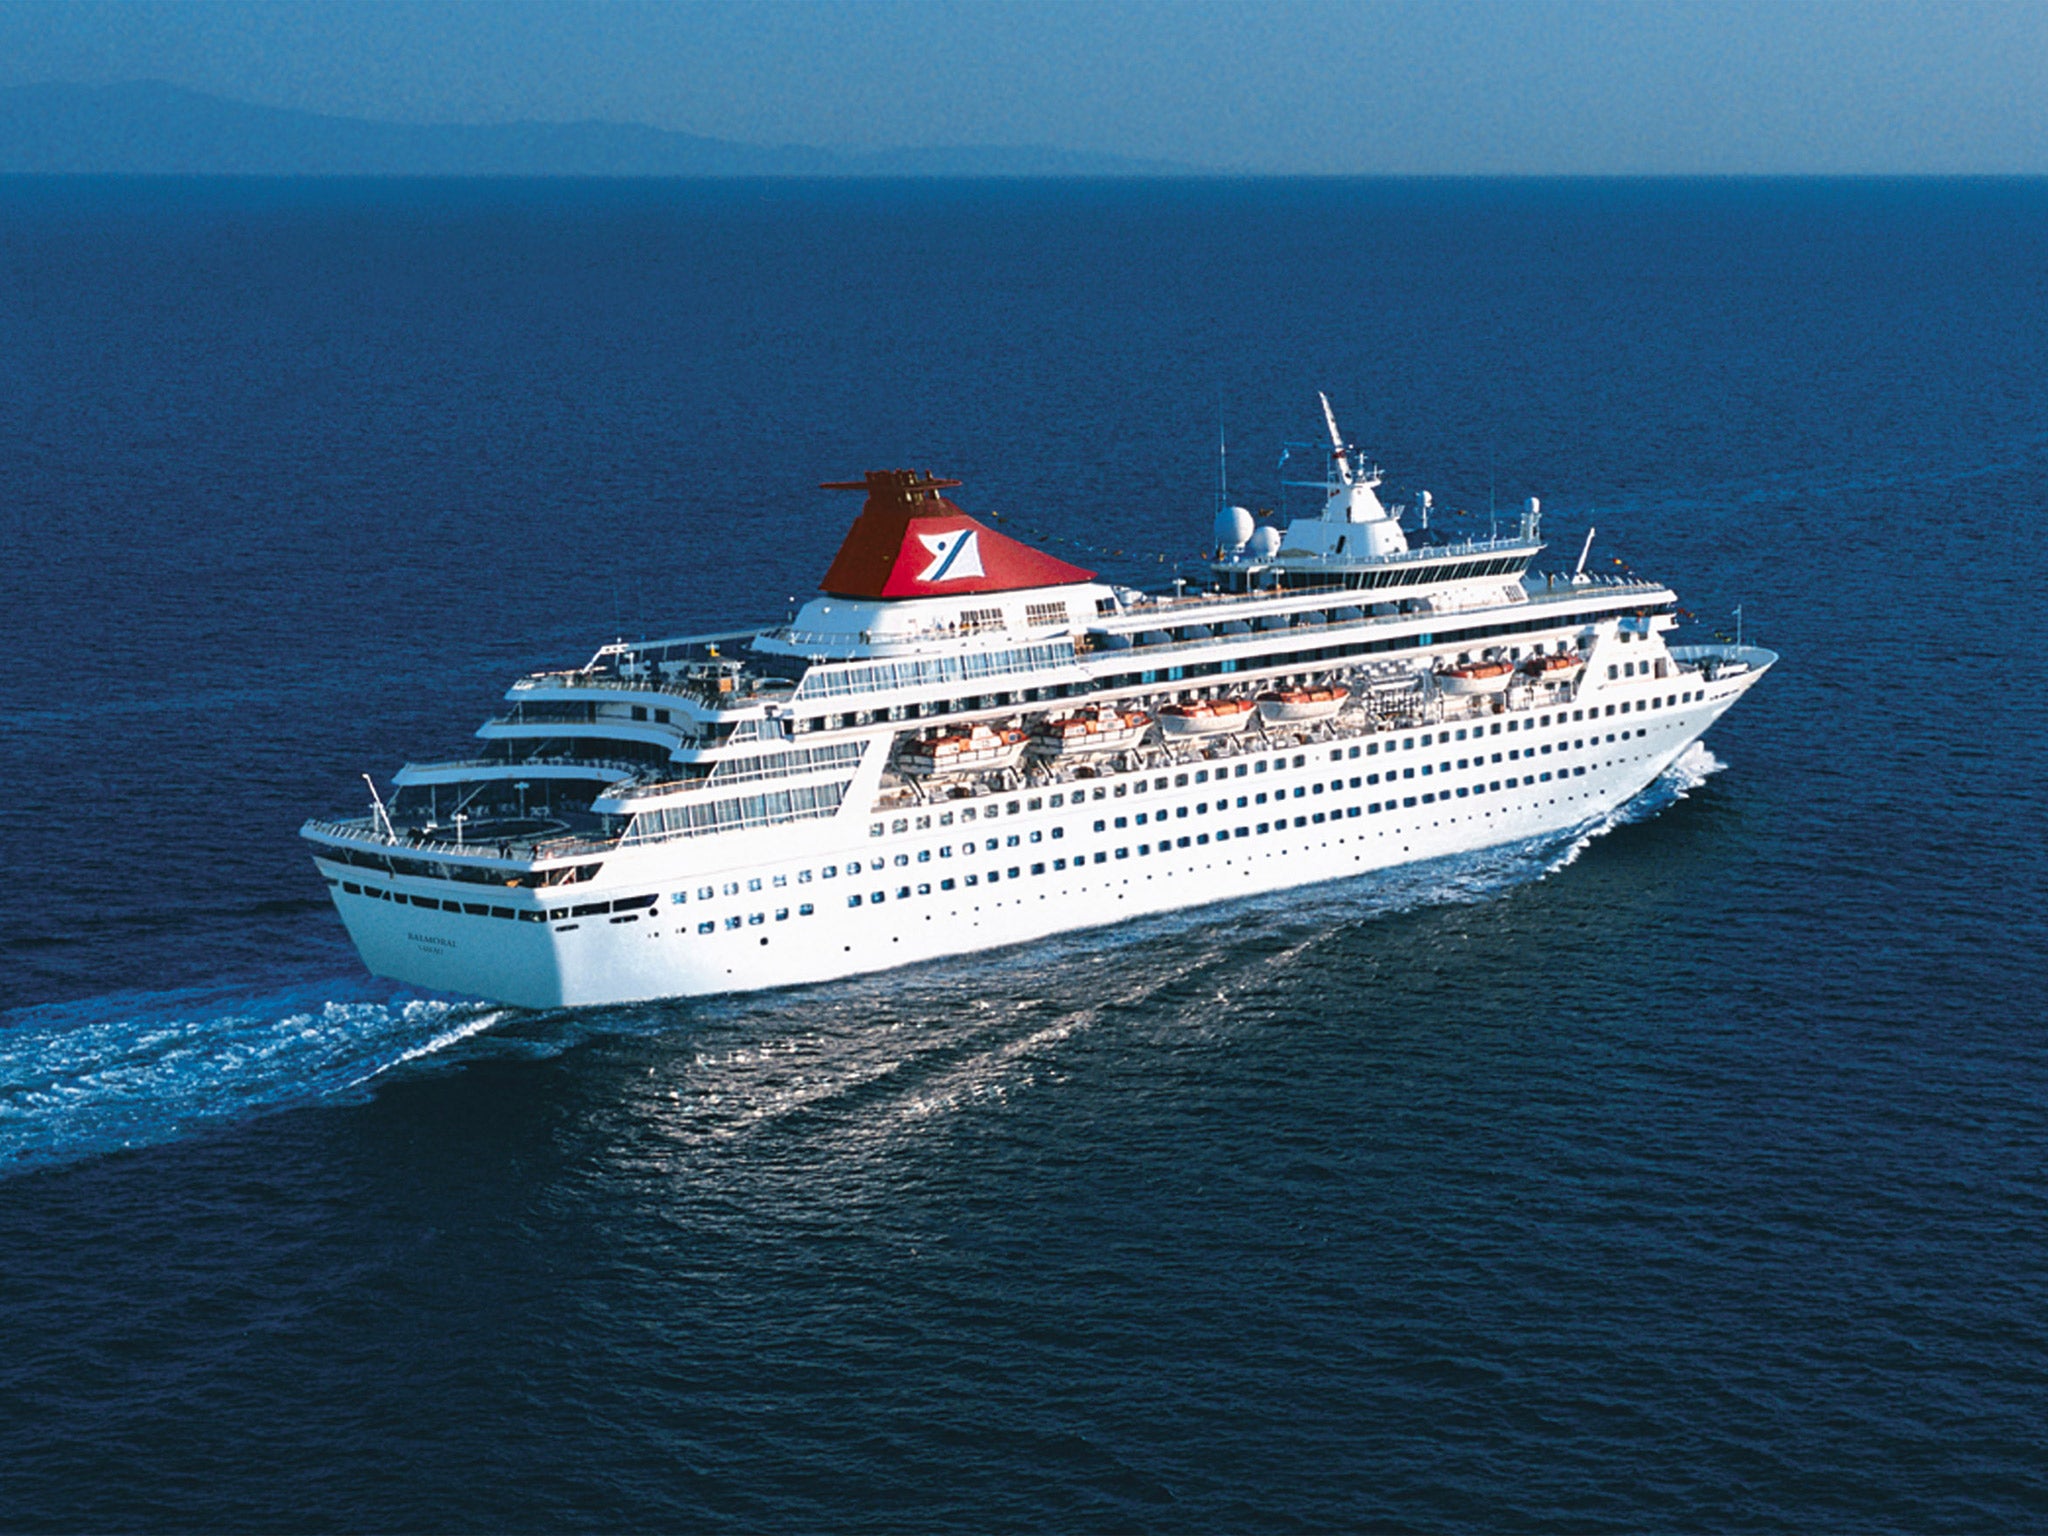 Sale away: Cruise bargains are still available this summer